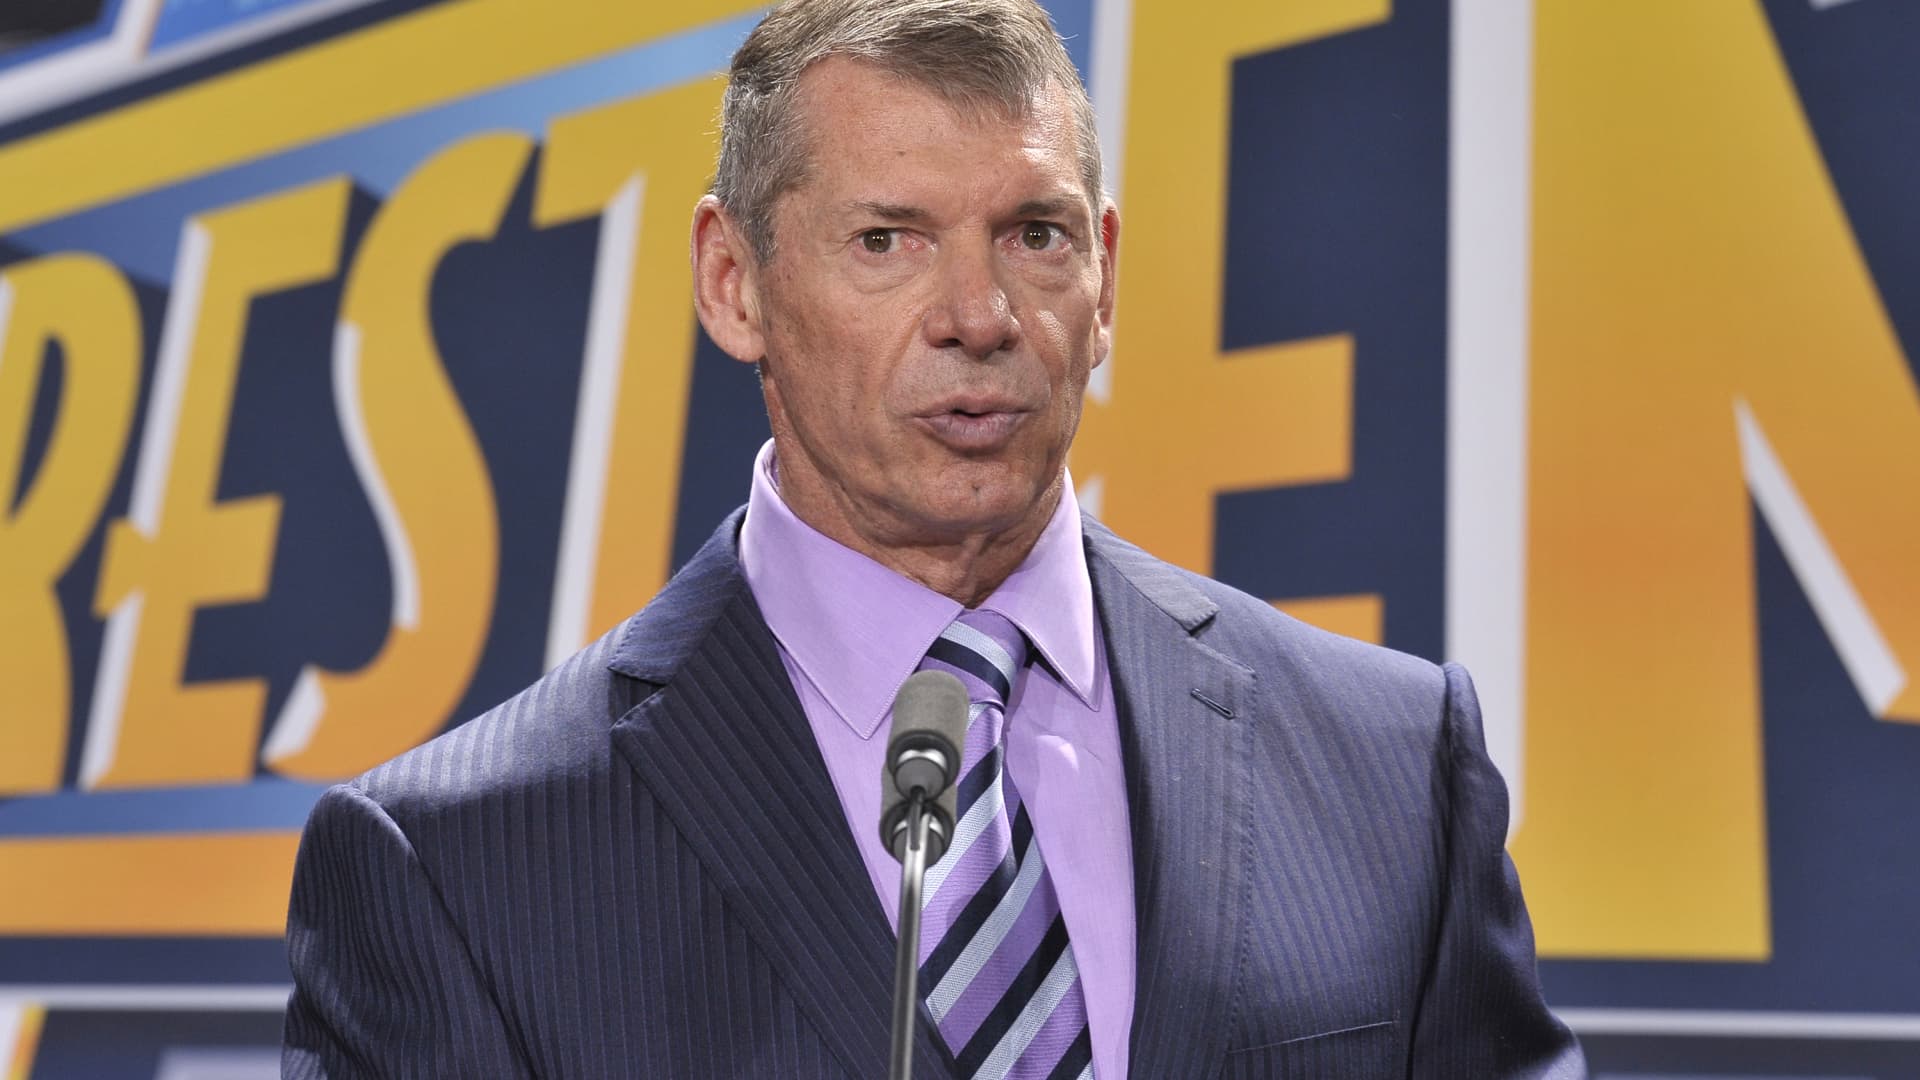 Vince McMahon retires as WWE CEO after sexual misconduct probe